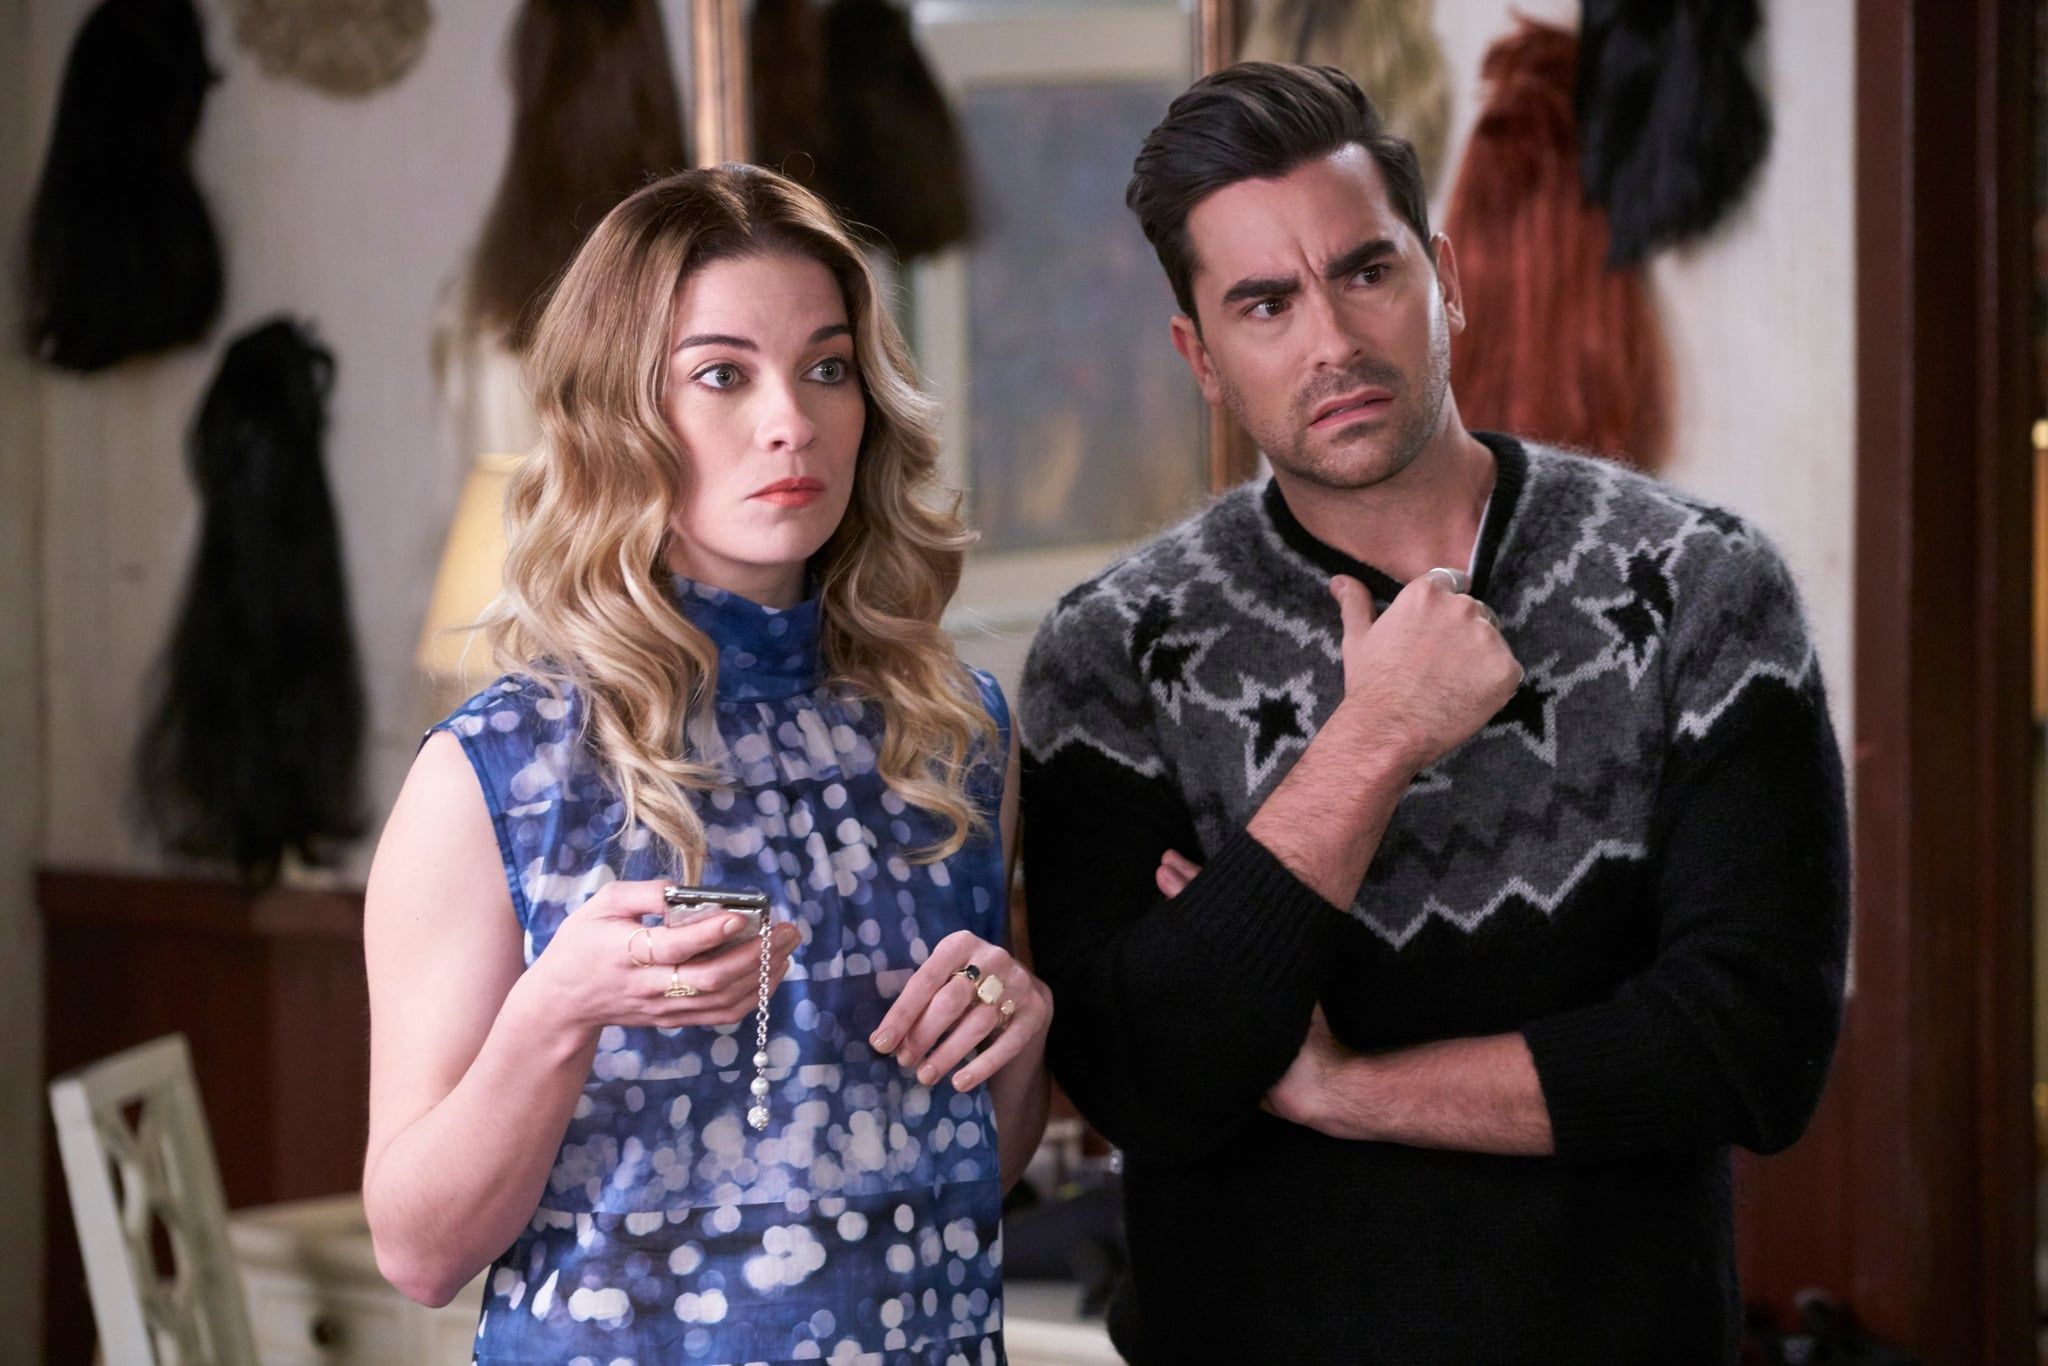 A Dedicated Schitt’s Creek Fan Made A Montage Of Alexis Saying ‘David’ Over And Over Again And It’s Incredible